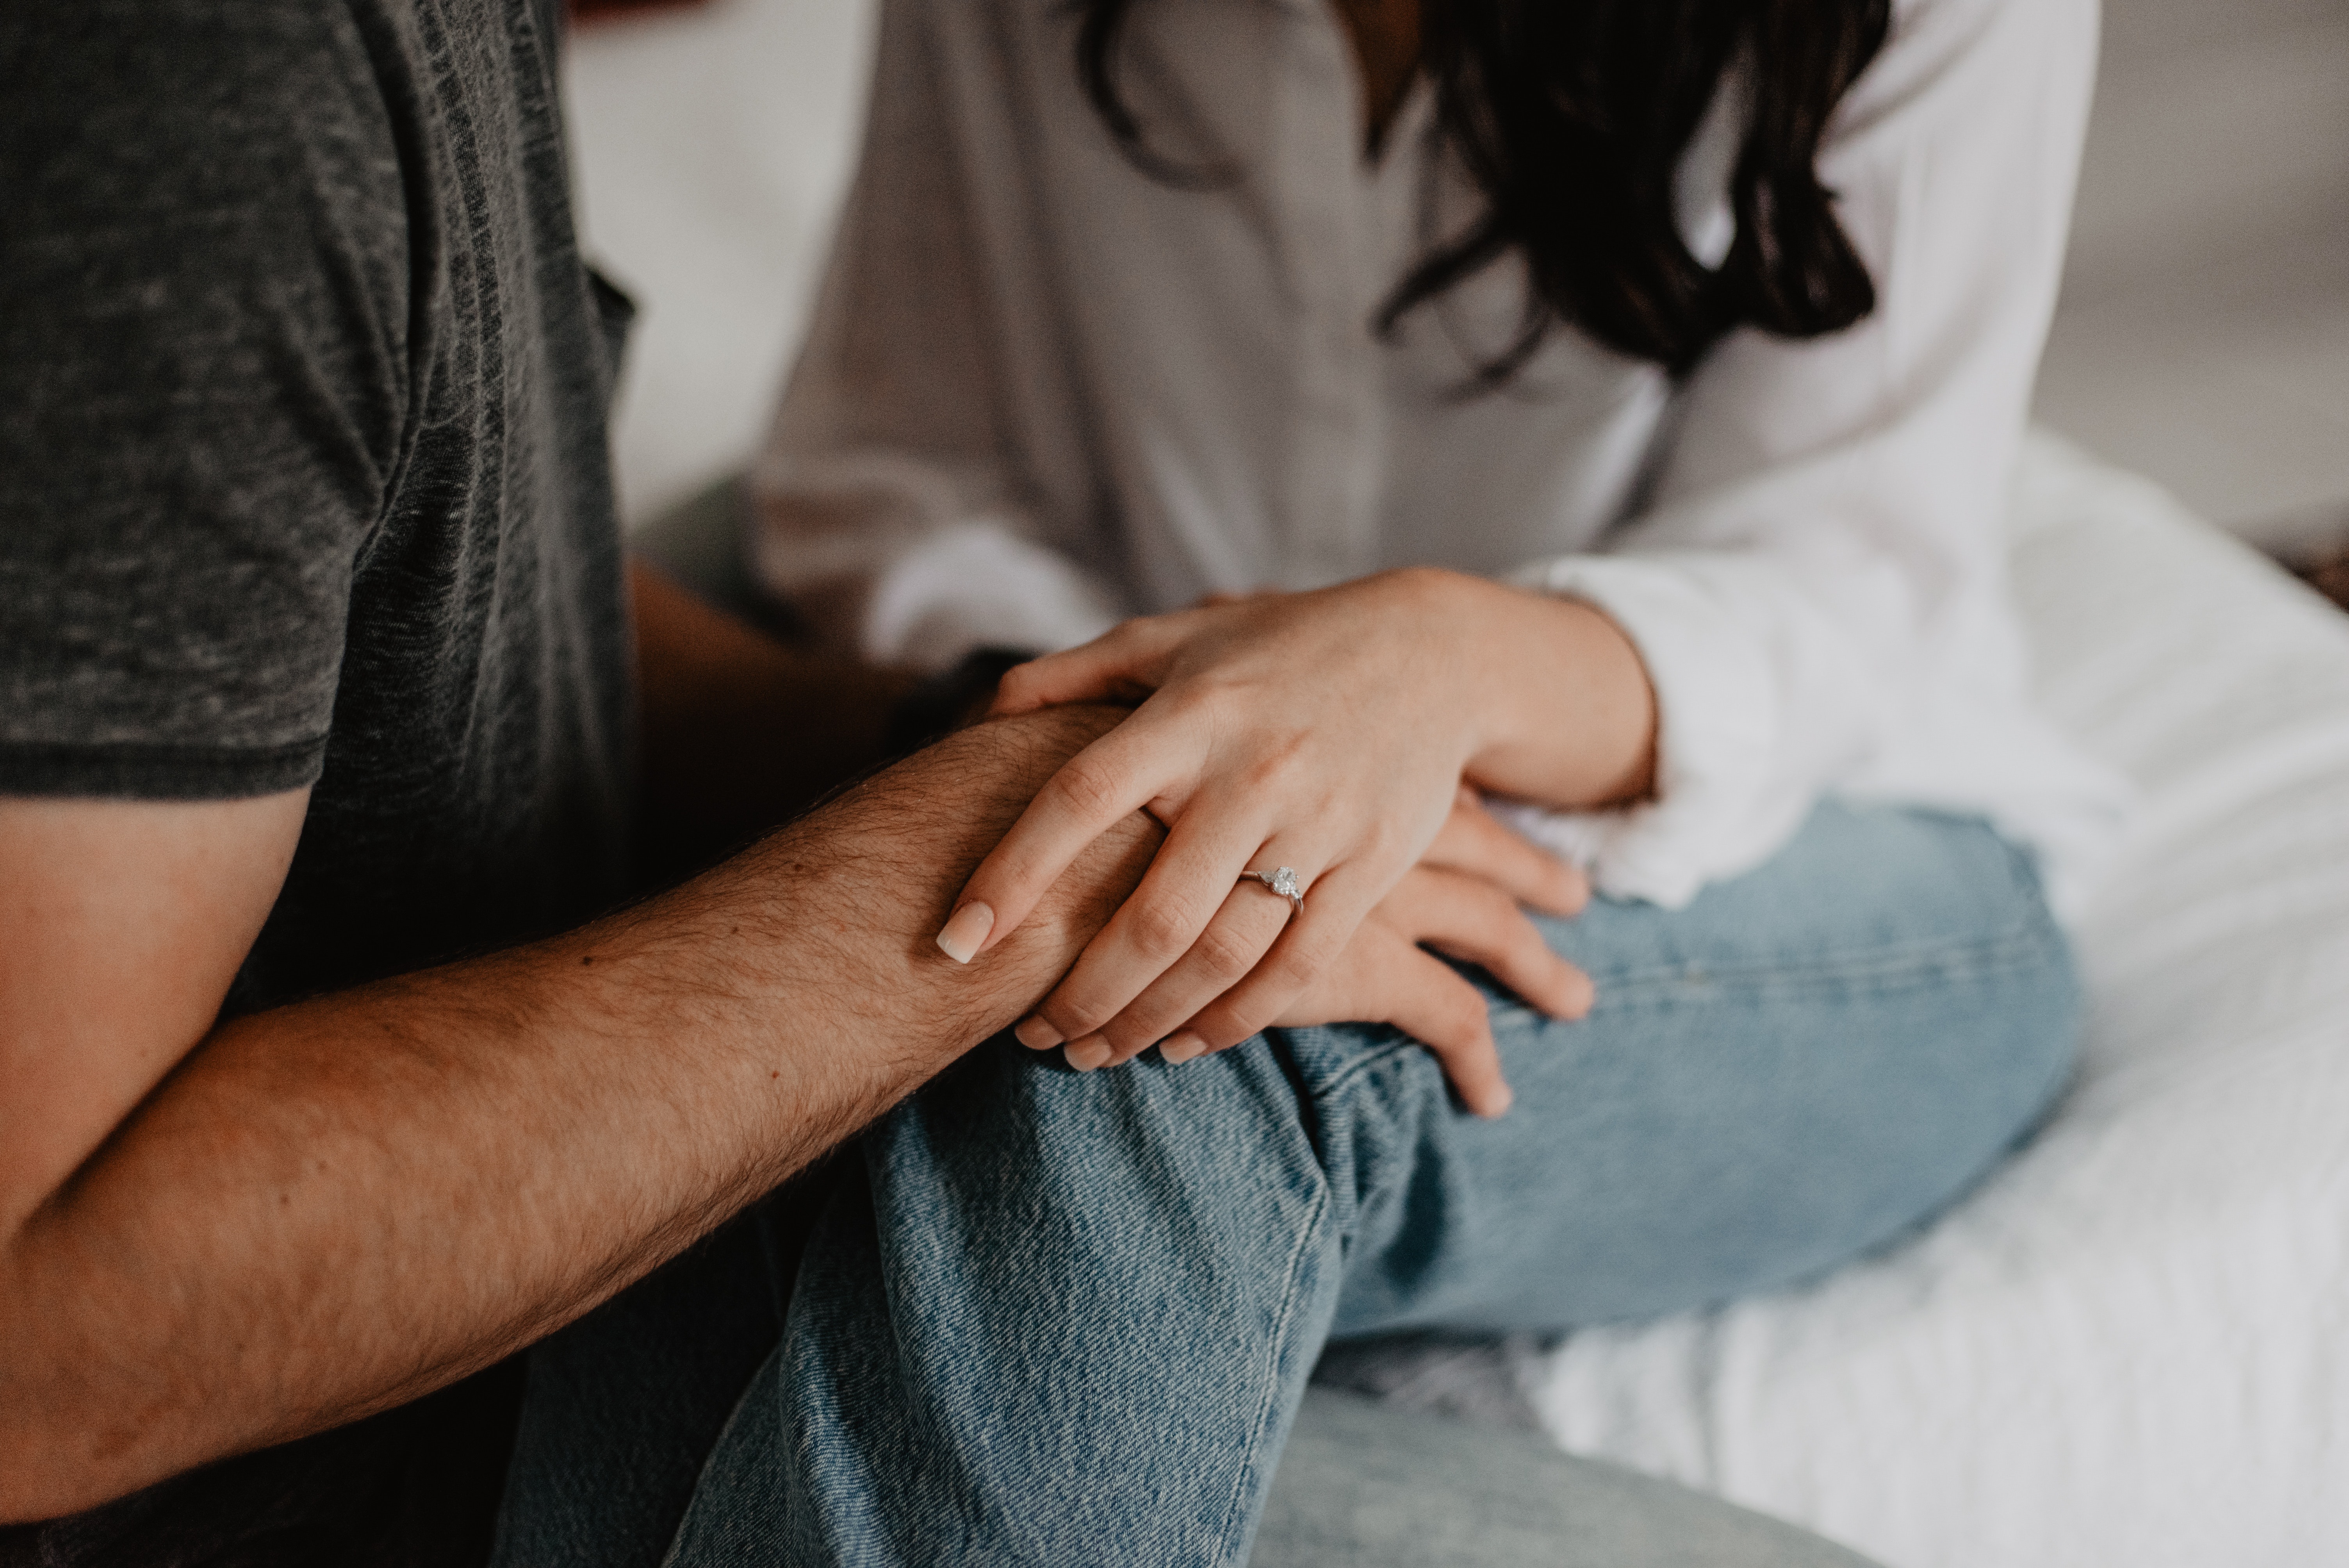 Woman Holding Man's Hand. | Source: Pexels